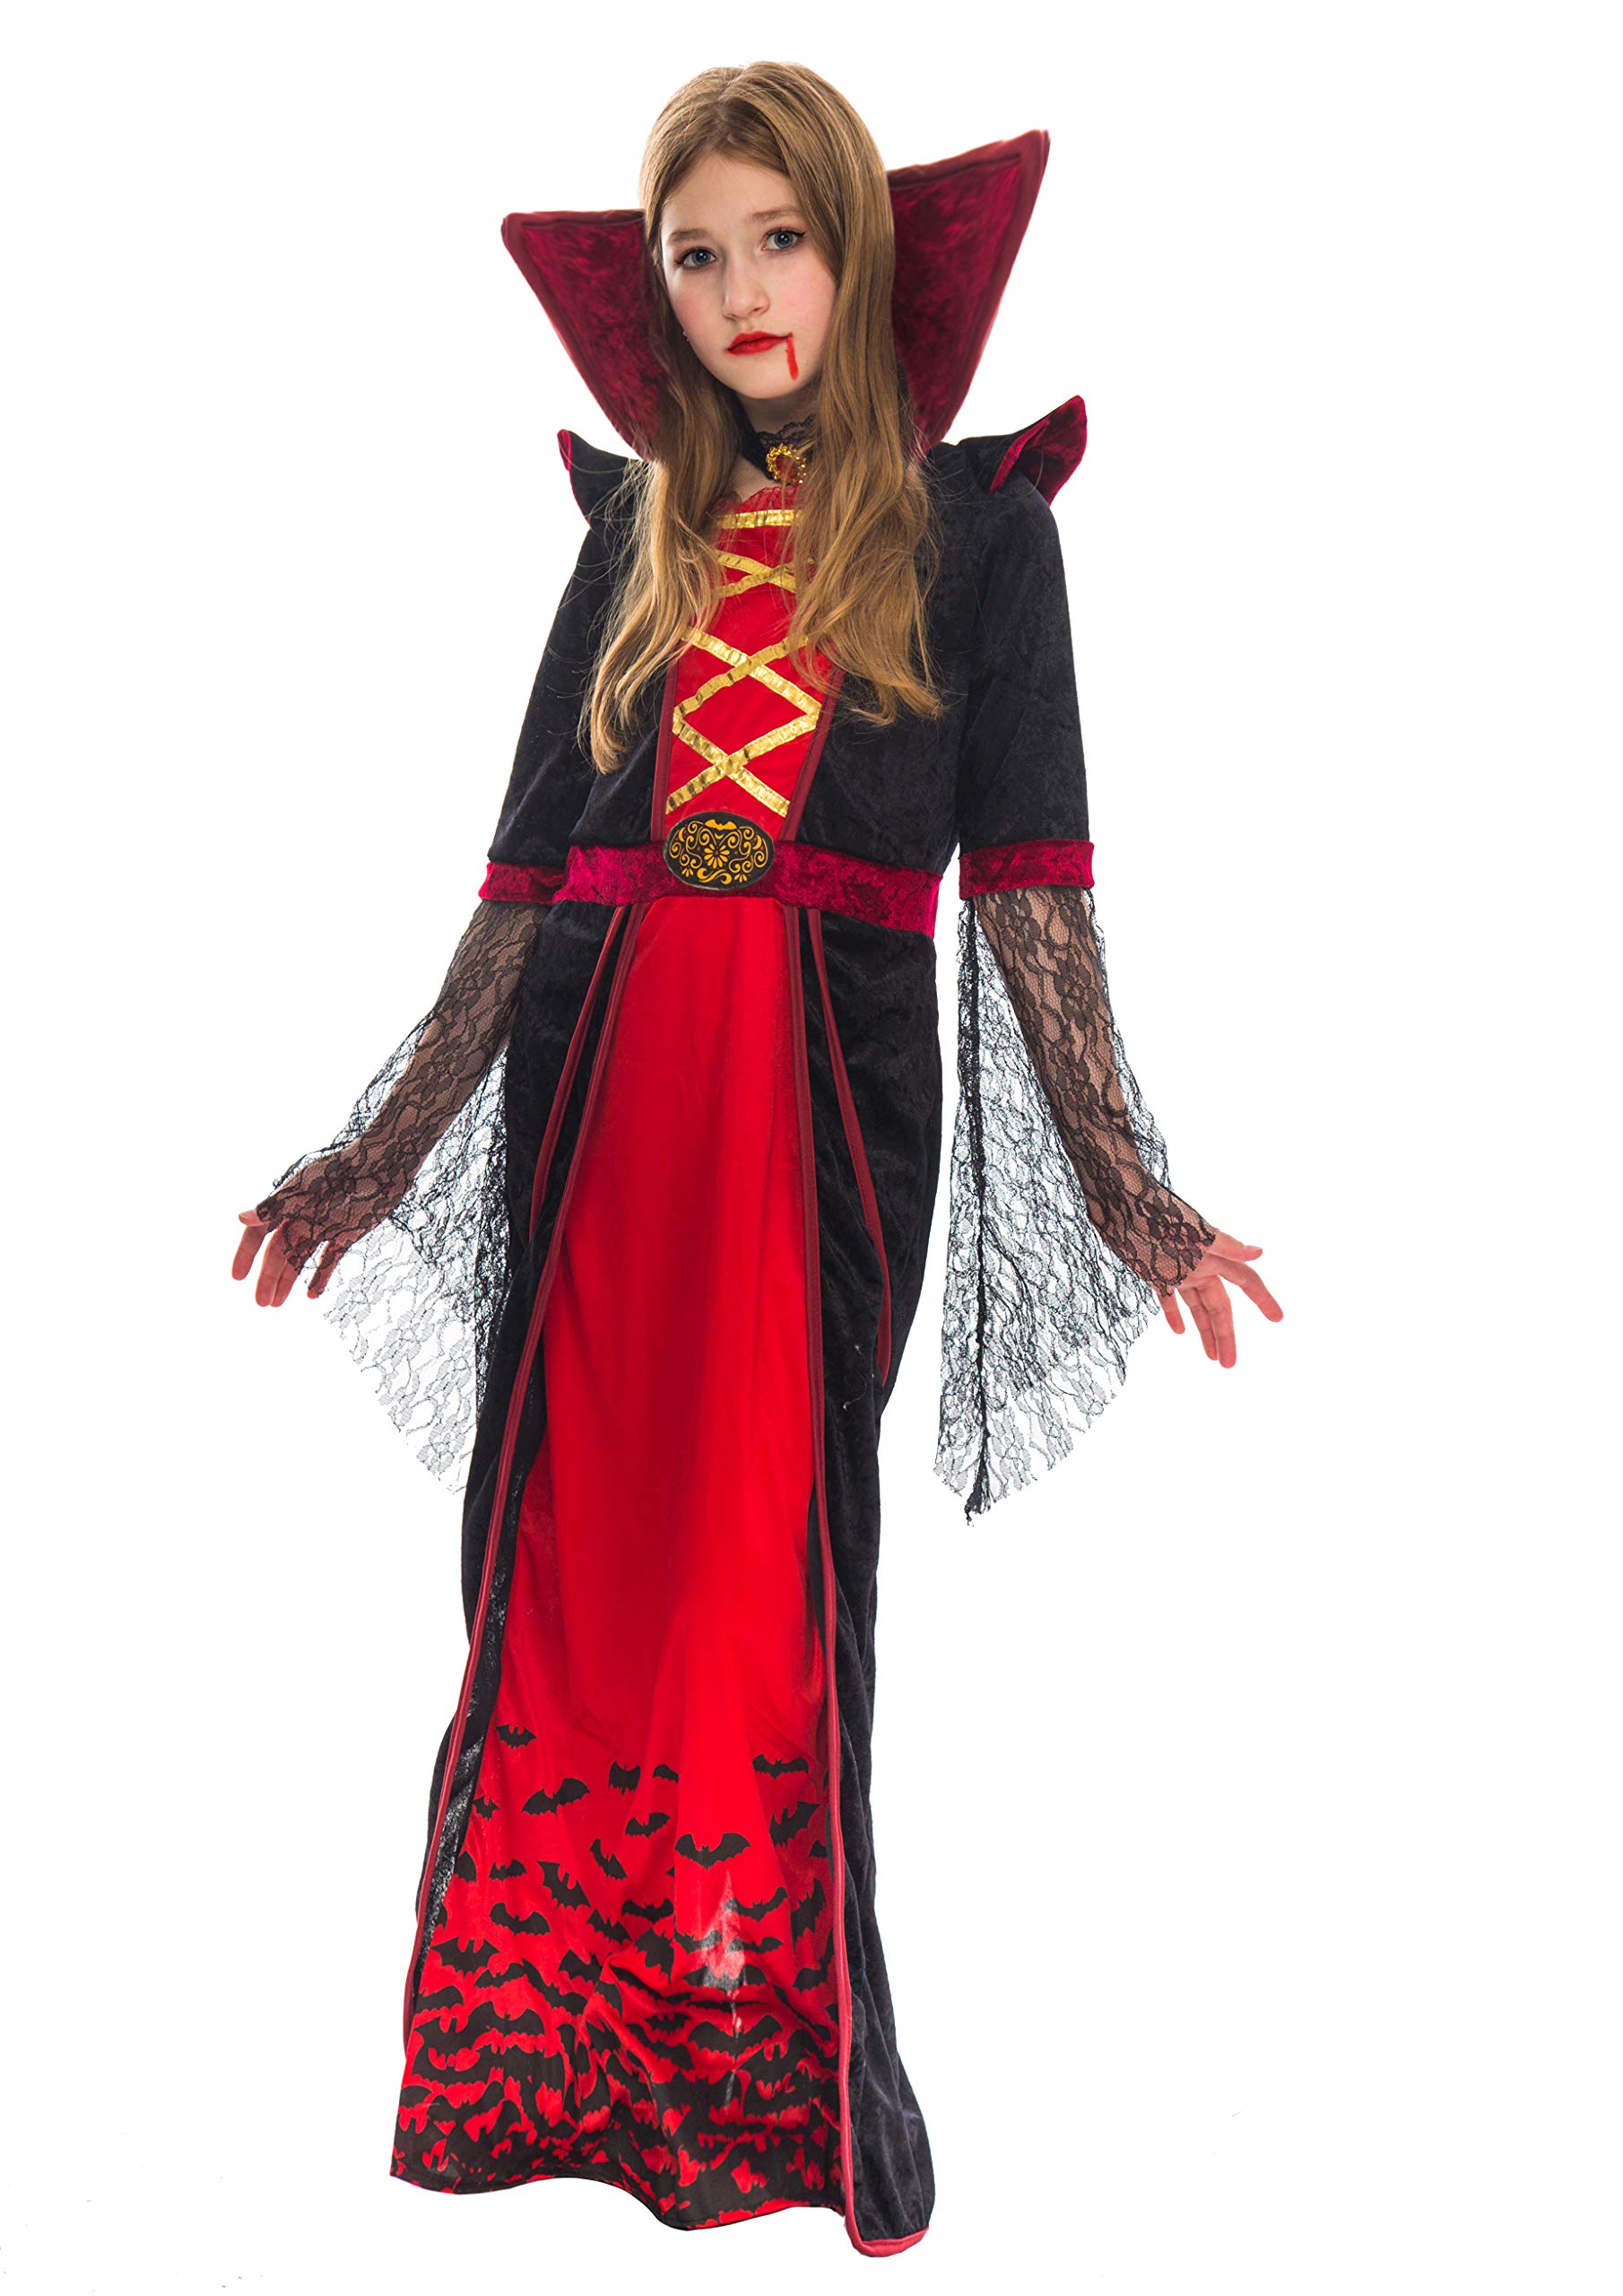 Suit Yourself Dark Vampire Costume for Girls, Size Large (12-14 ...